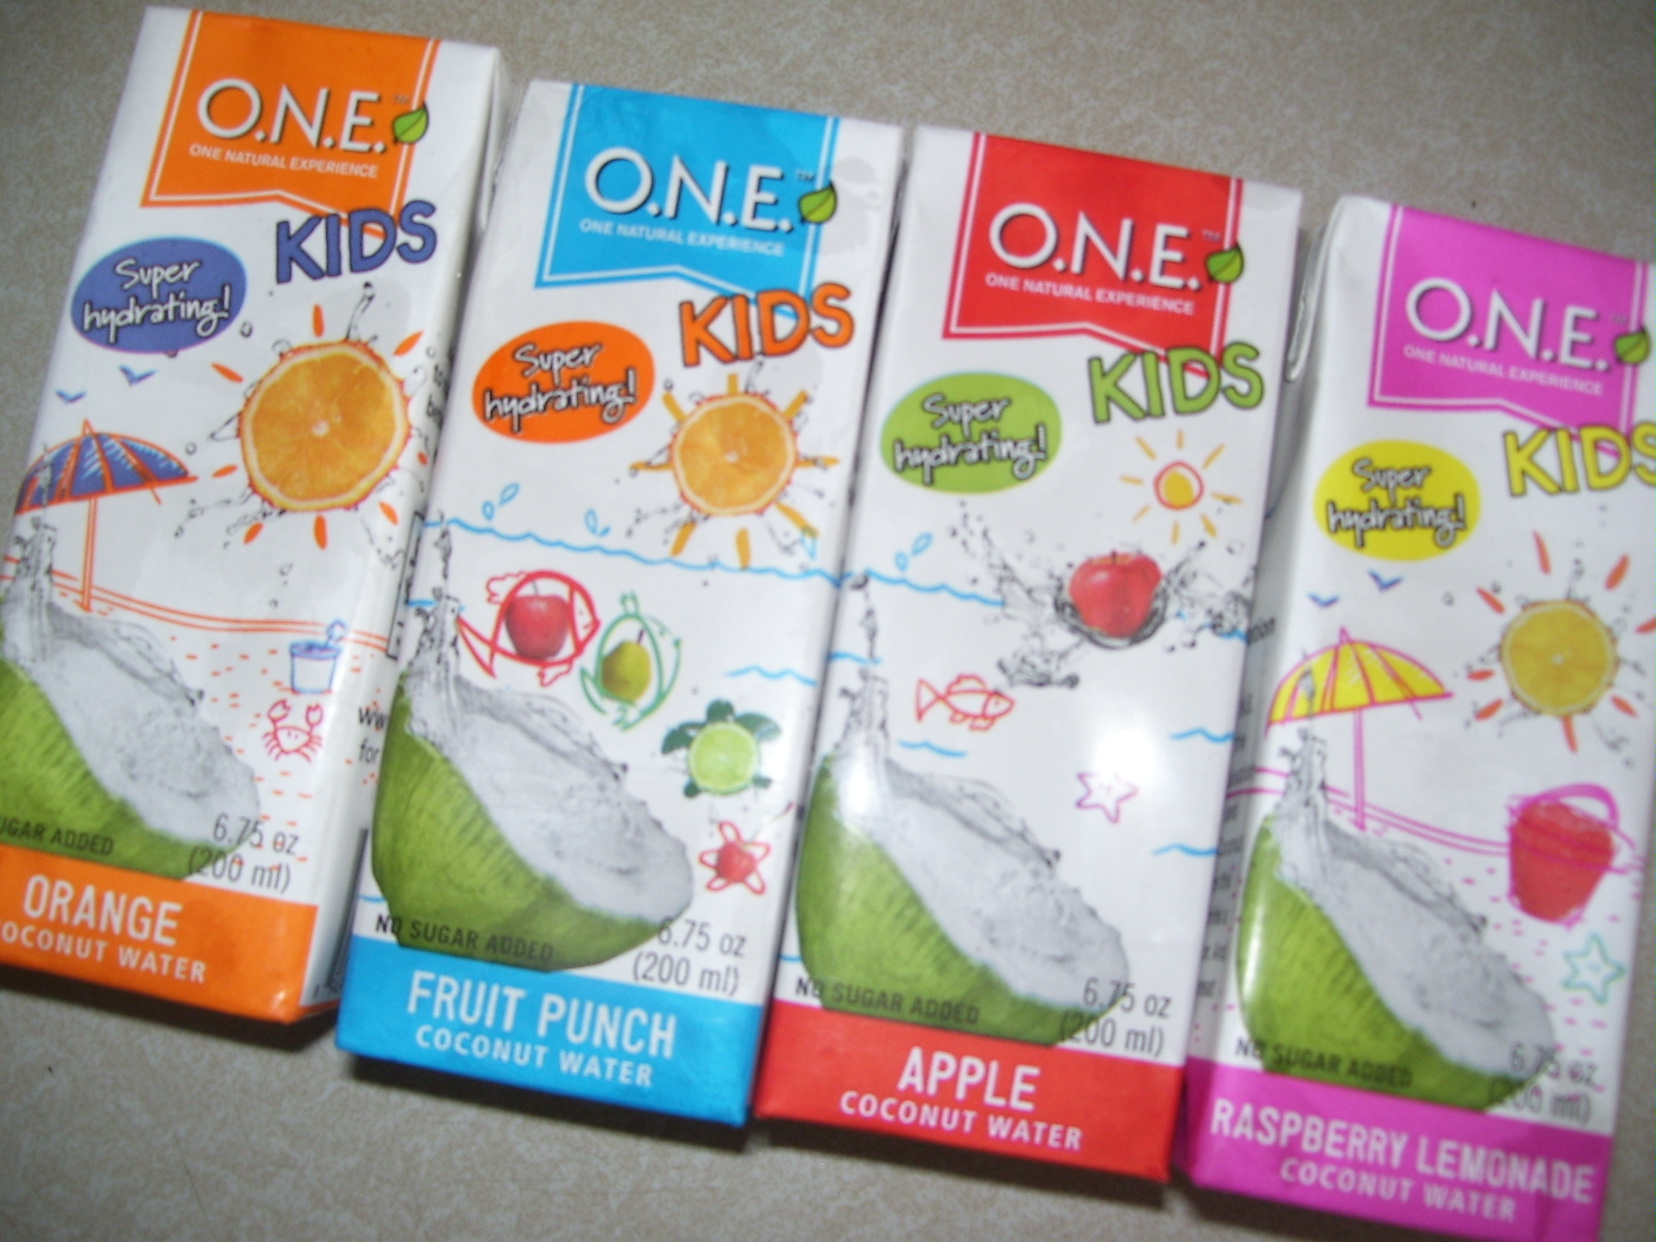 O.N.E. Kids Coconut Water – Keeping My Kids Happy and Hydrated